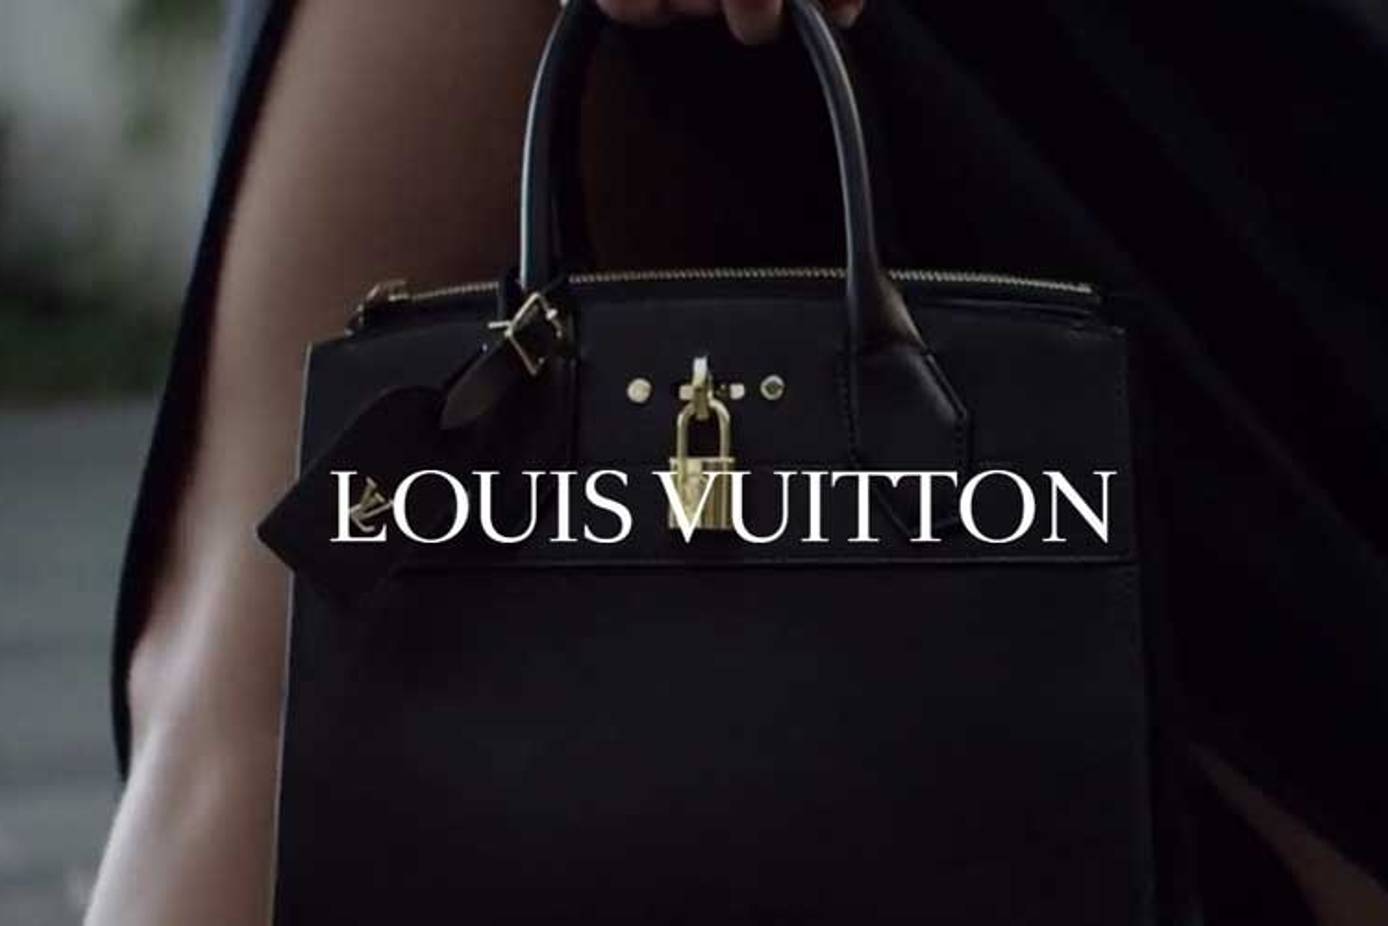 LVMH, Catterton And Groupe Arnault Partner To Create L Catterton, The  Leading Global Consumer-Focused Private Equity Firm